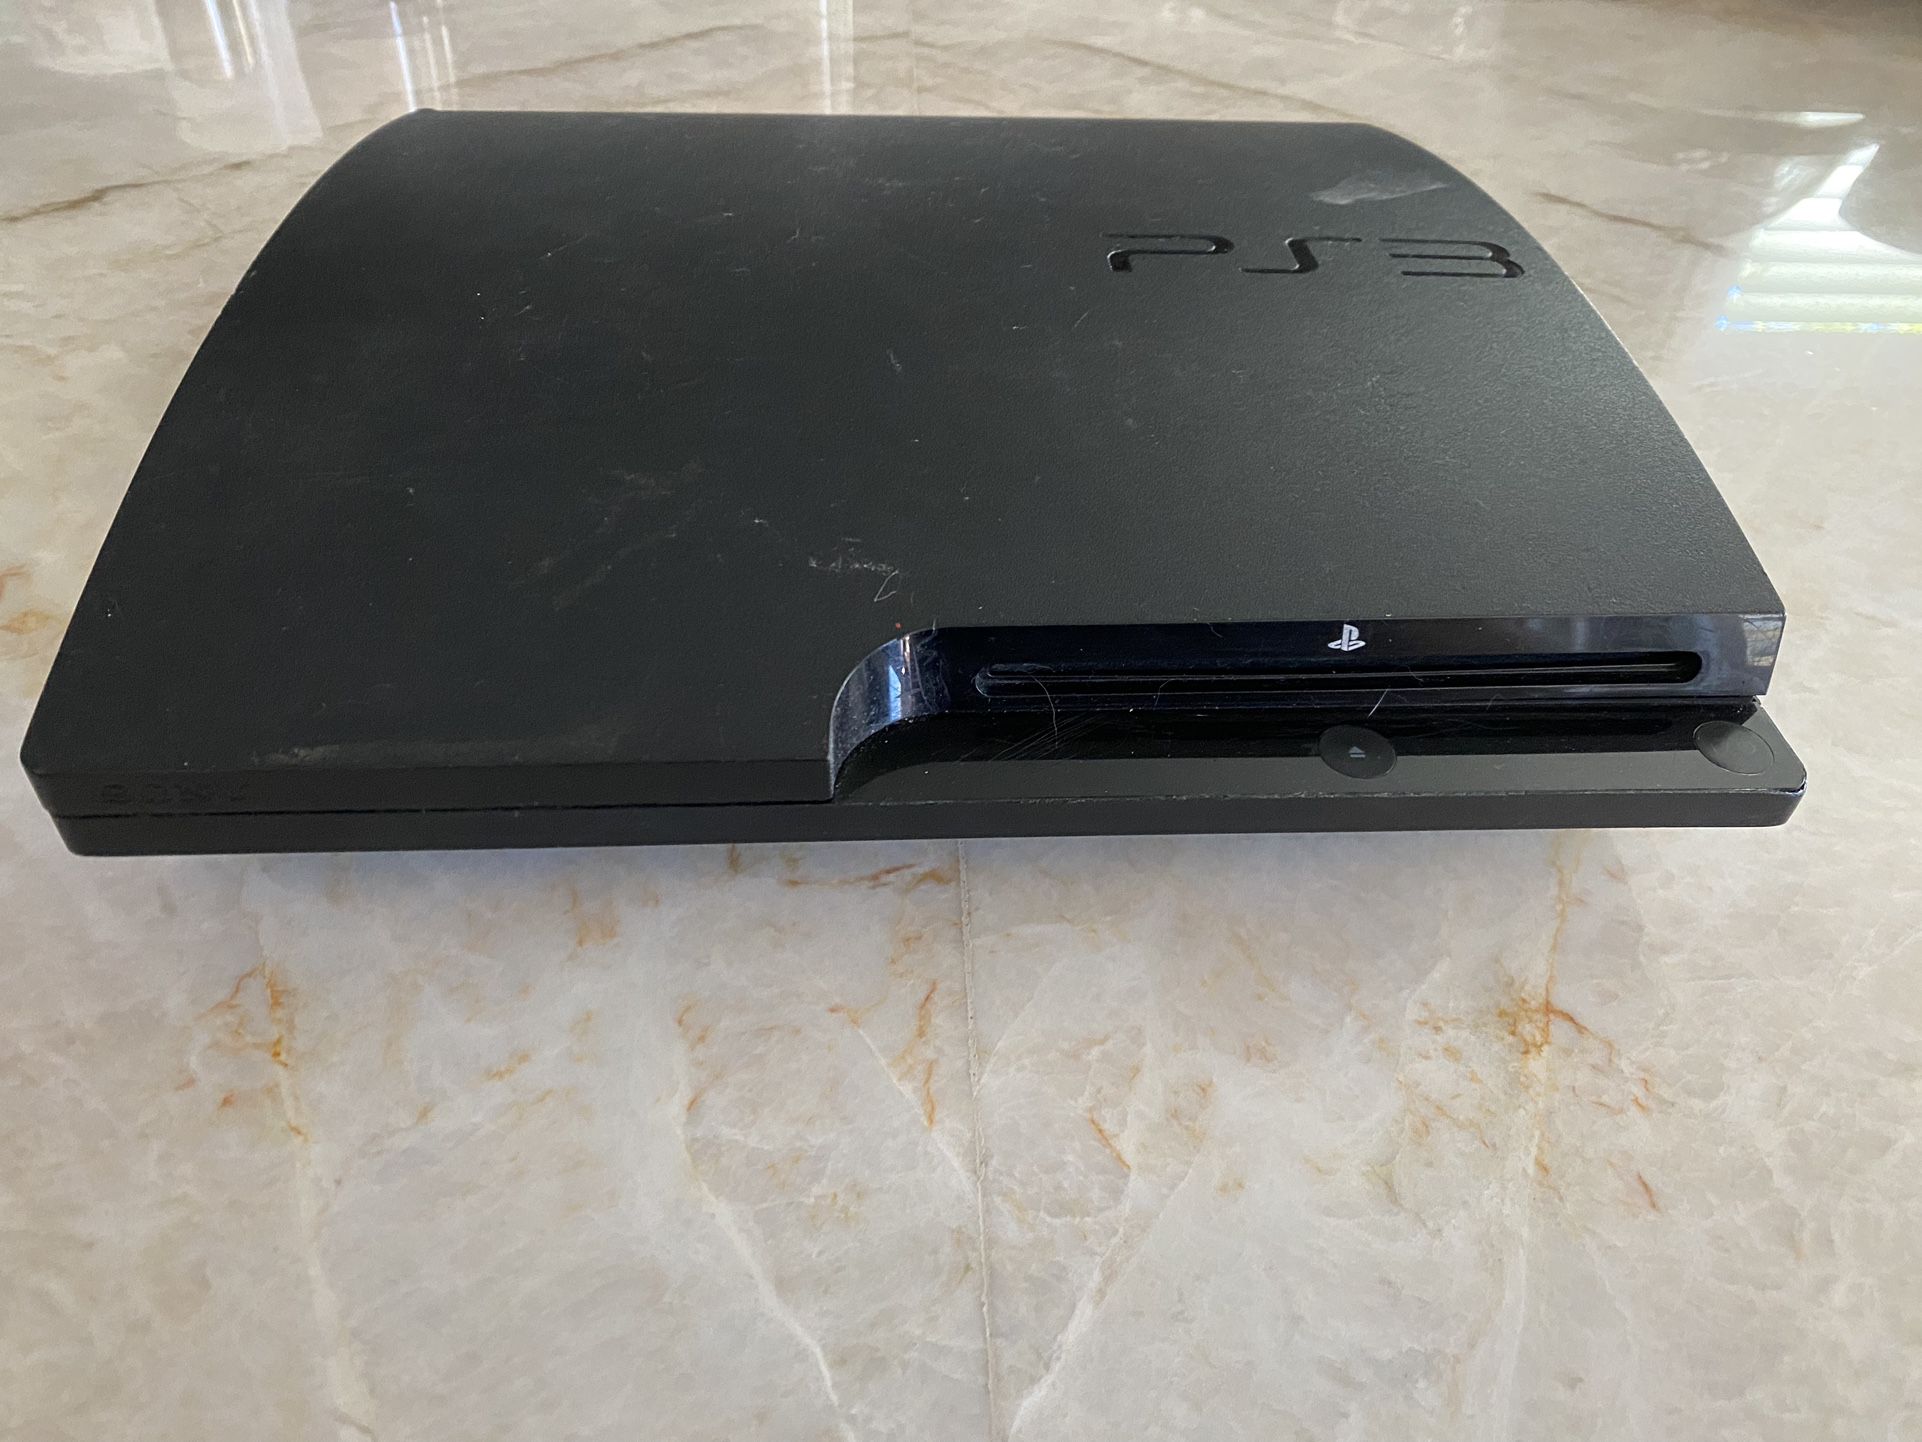 PS3 For Parts 